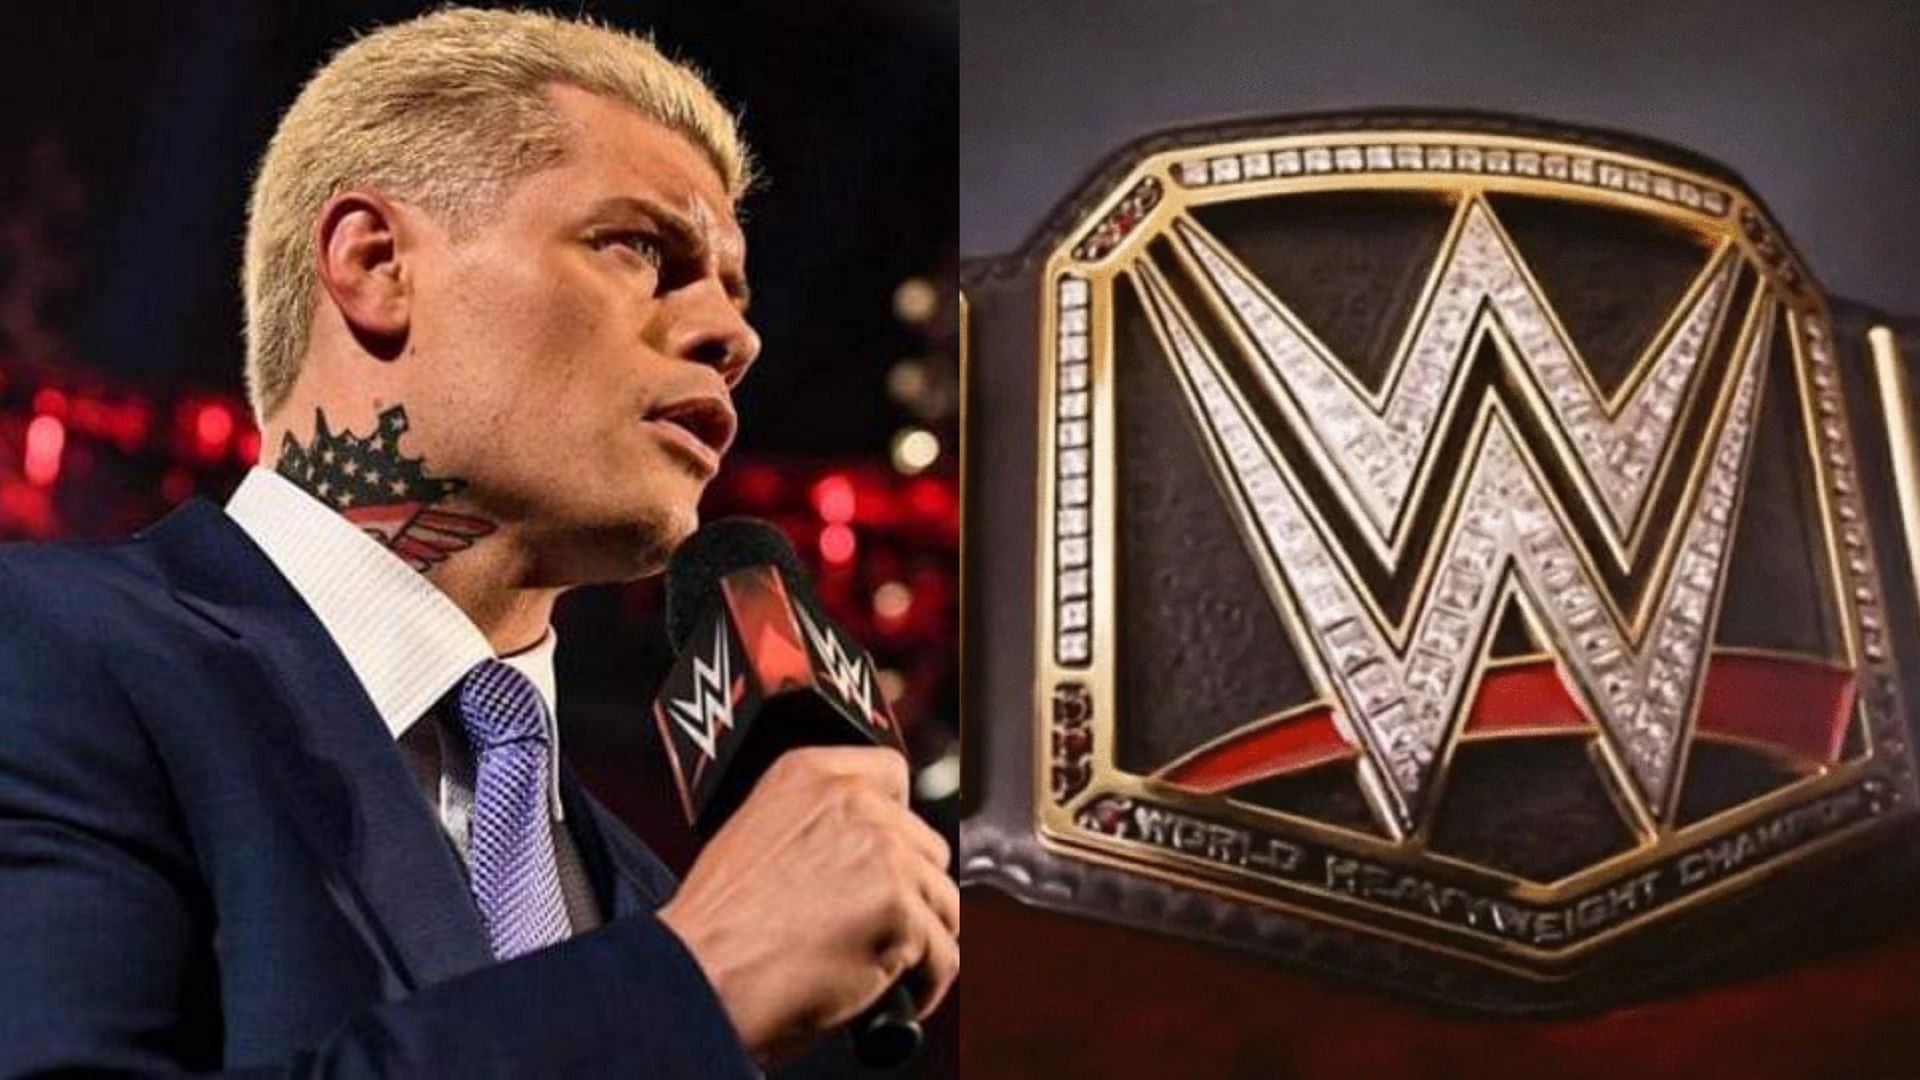 Cody Rhodes is set to main event WrestleMania 39